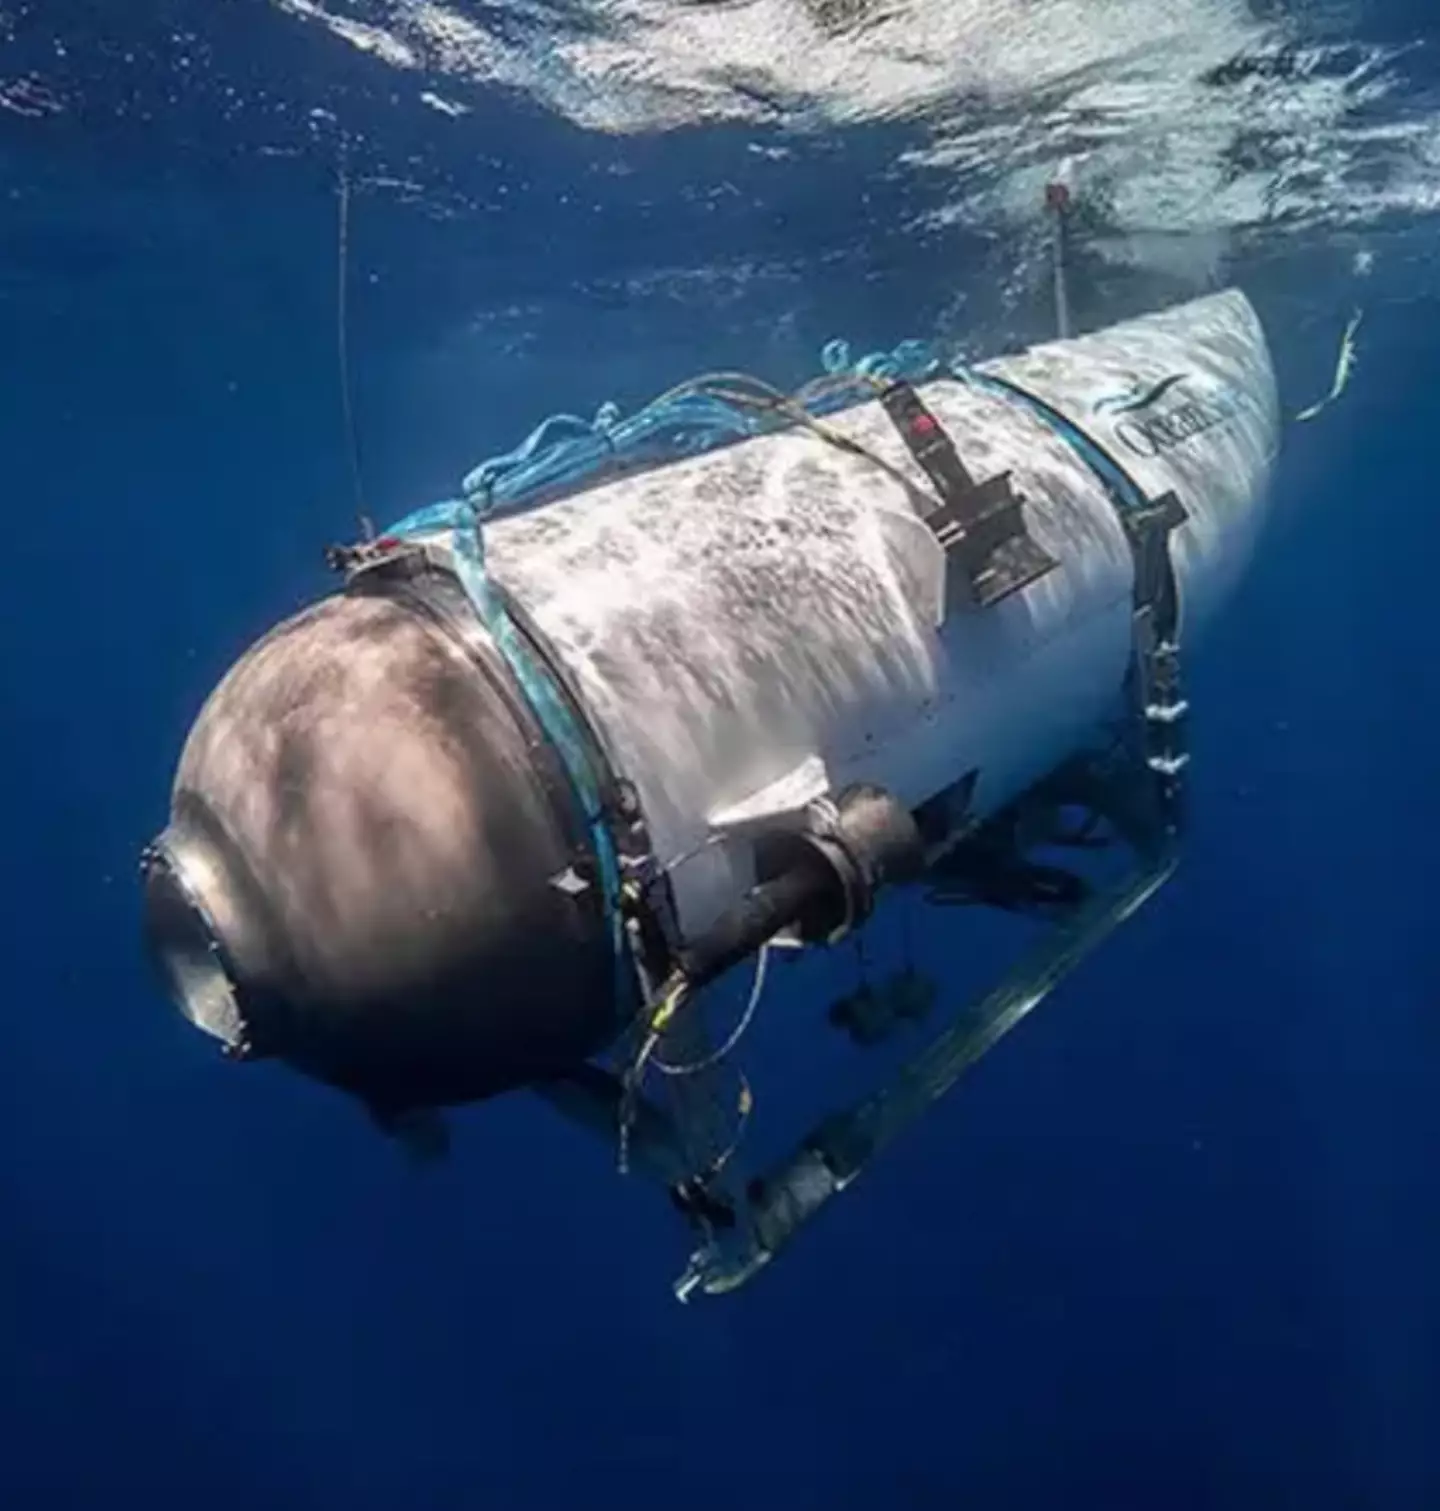 A new documentary about the Titan submersible disaster features never-before-heard audio. OceanGate/Becky Kagan Schott